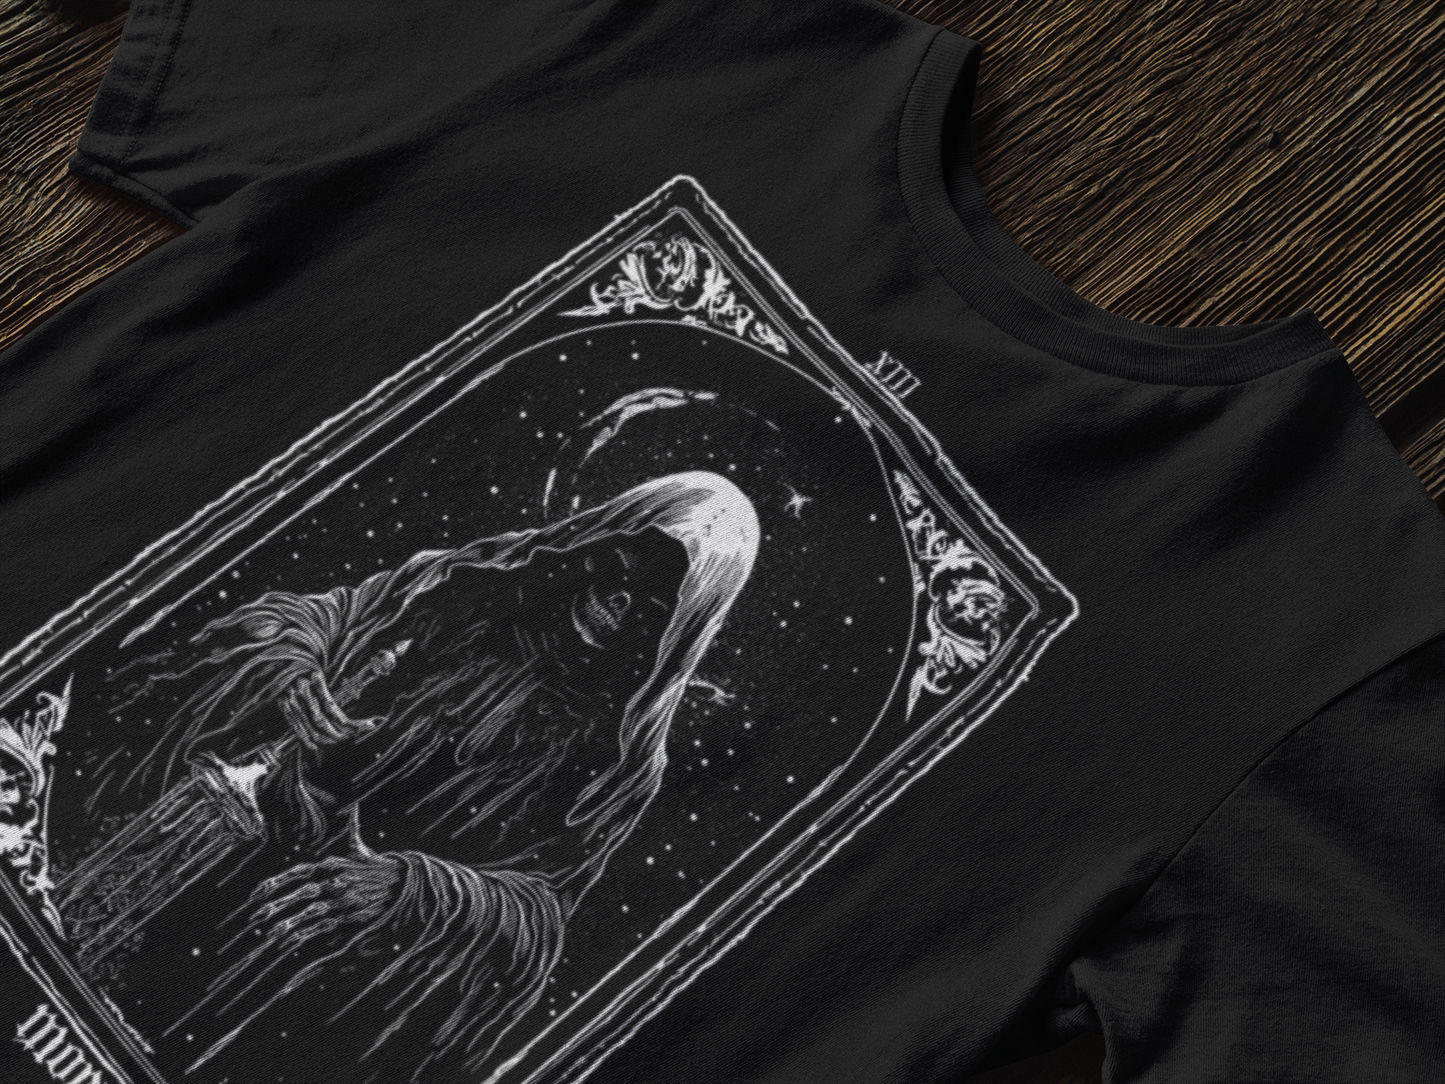 Mors Tarot Card by Hellhound Clothing - Embrace the Mystic Transition